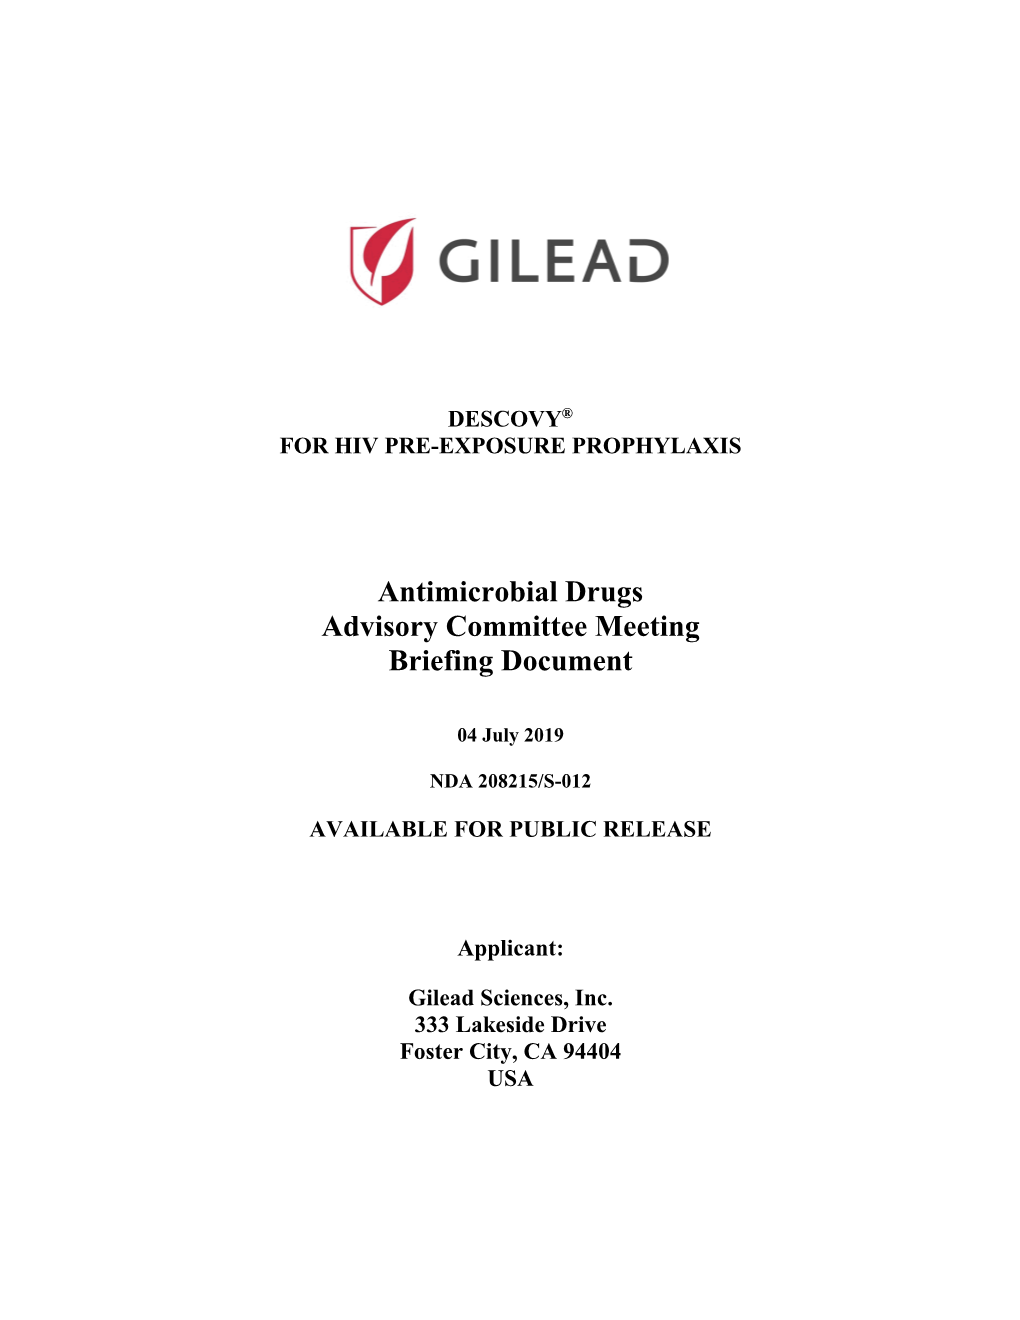 Antimicrobial Drugs Advisory Committee Meeting Briefing Document